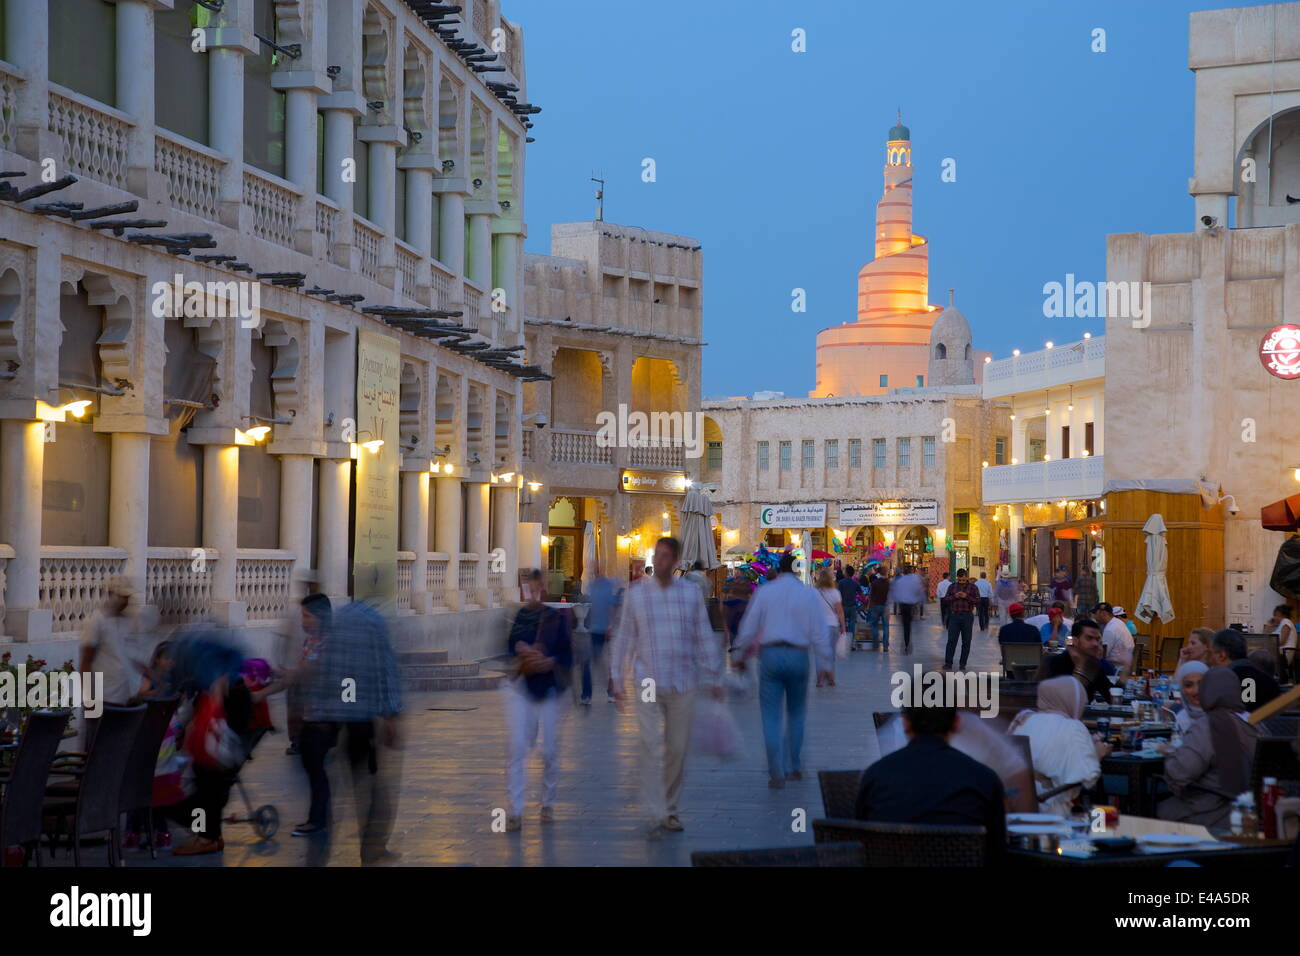 Souq Waqif looking towards the illuminated spiral mosque of the Kassem Darwish Fakhroo Islamic Centre, Doha, Qatar, Middle East Stock Photo